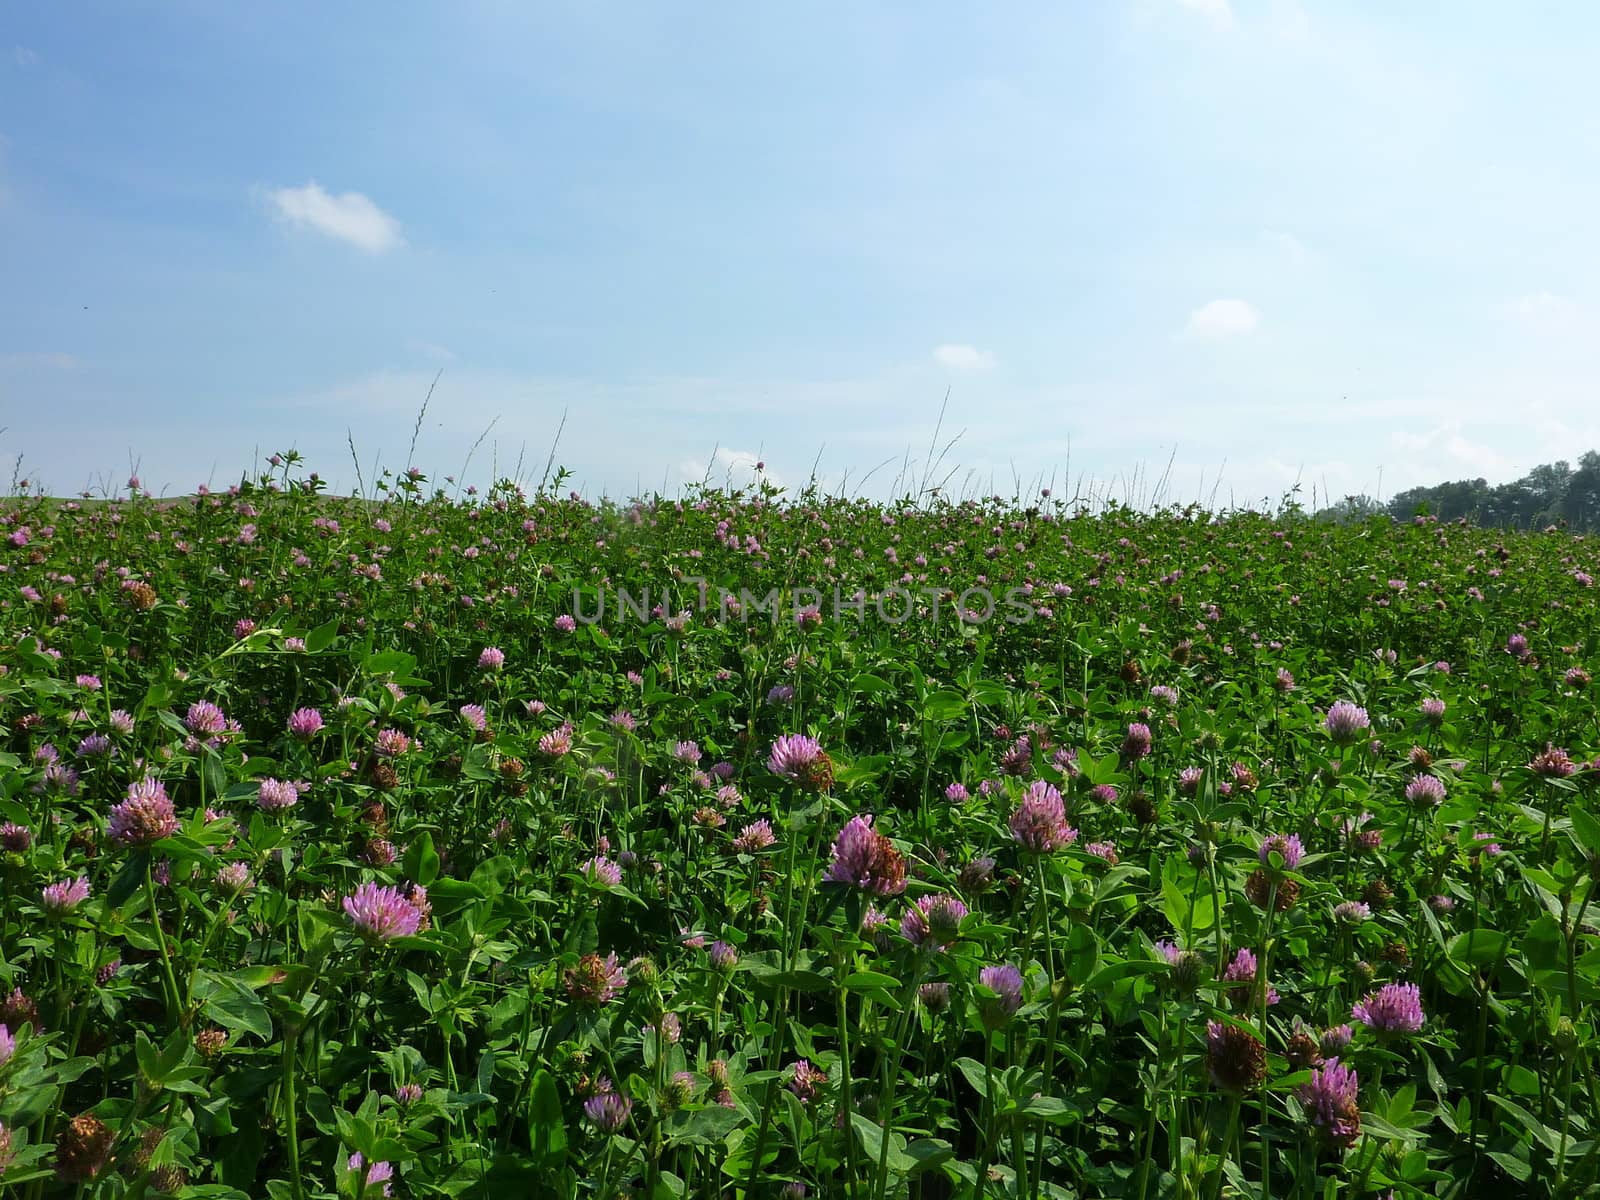 Field with Clover (Trifolium) by fxmdk